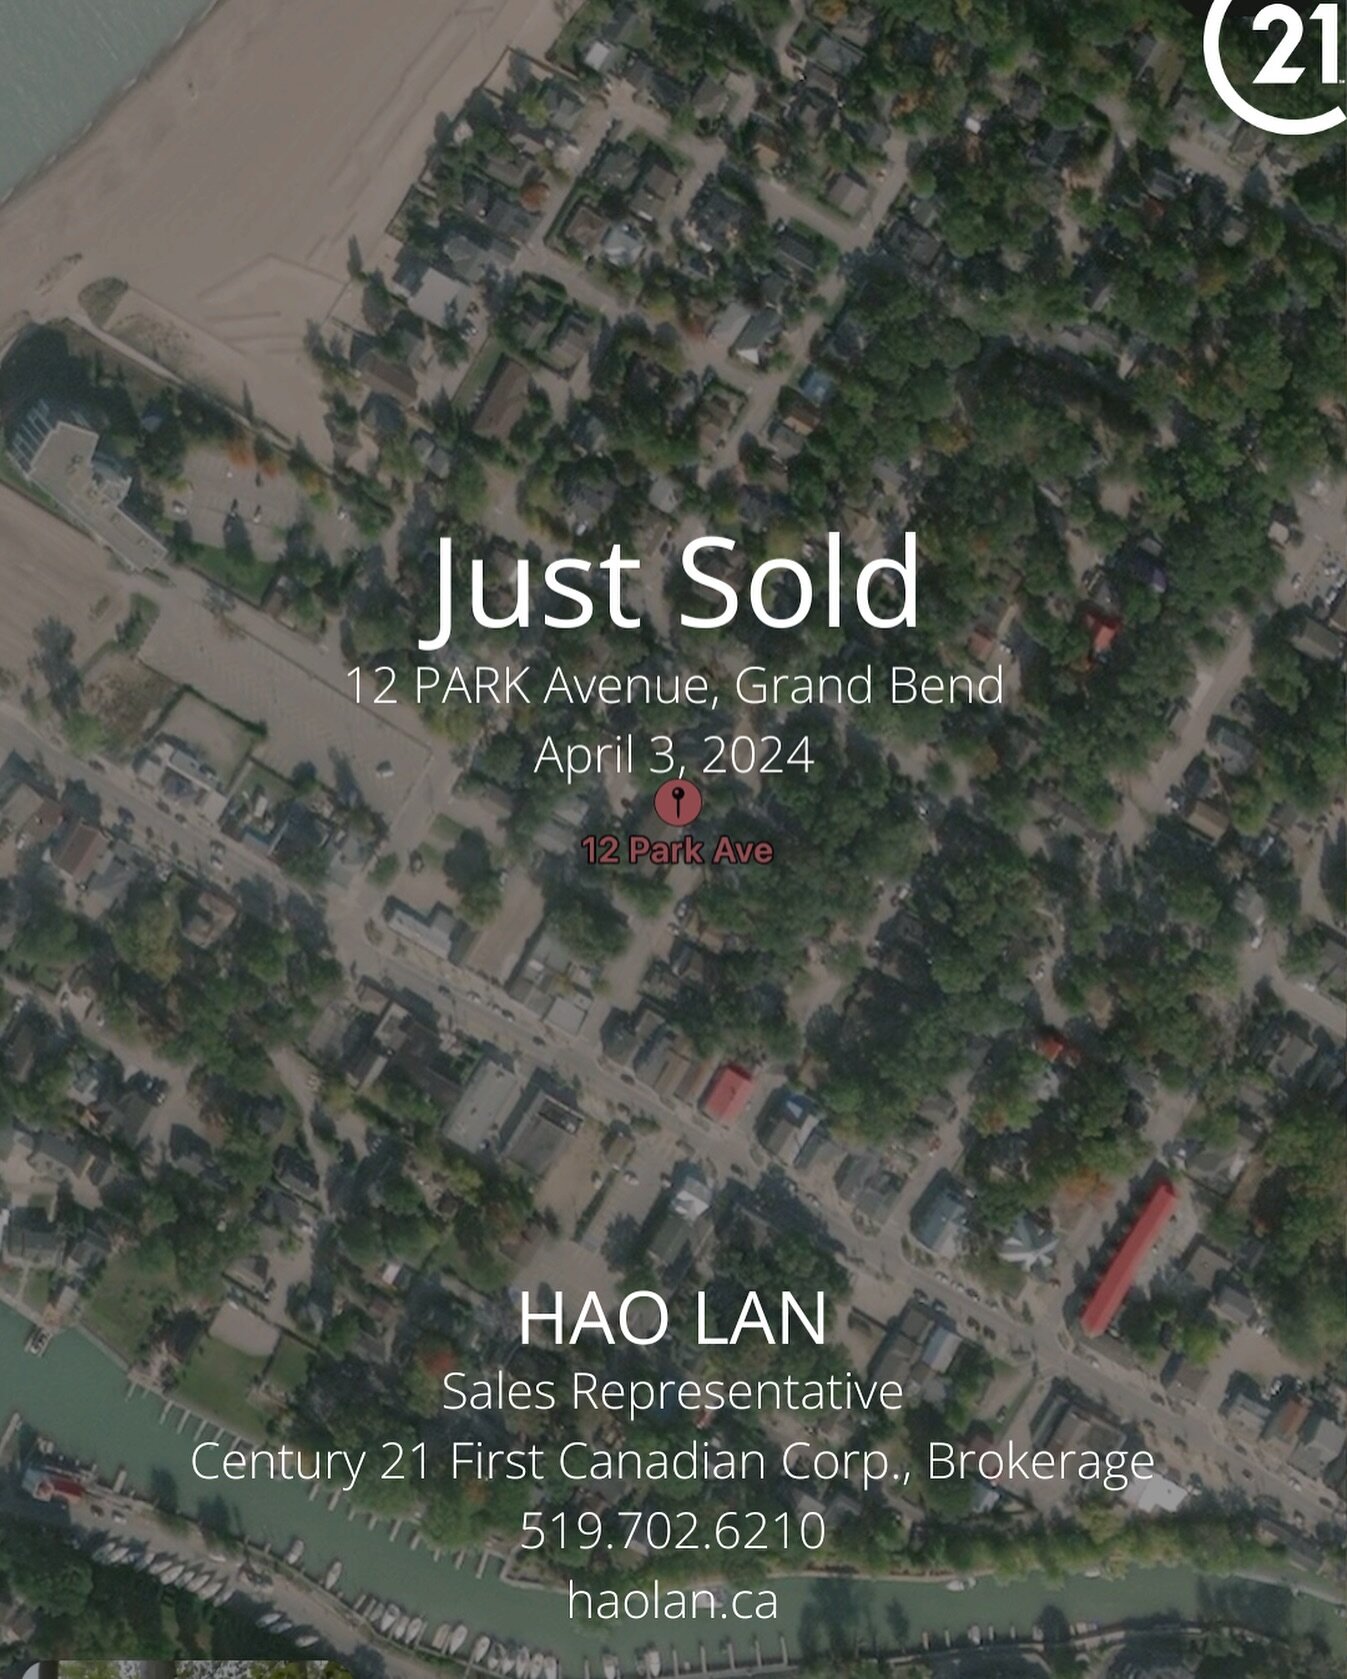 🏡 JUST SOLD - Representing Buyer
📍 12 PARK Avenue, Grand Bend, Ontario N0M 1T0
🧑🏻&zwj;💻 MLS&reg;#: 40542928

Congratulations to my wonderful clients on securing 12 Park Ave, just steps away from the beach and Lake Huron. This FREEHOLD, end unit 